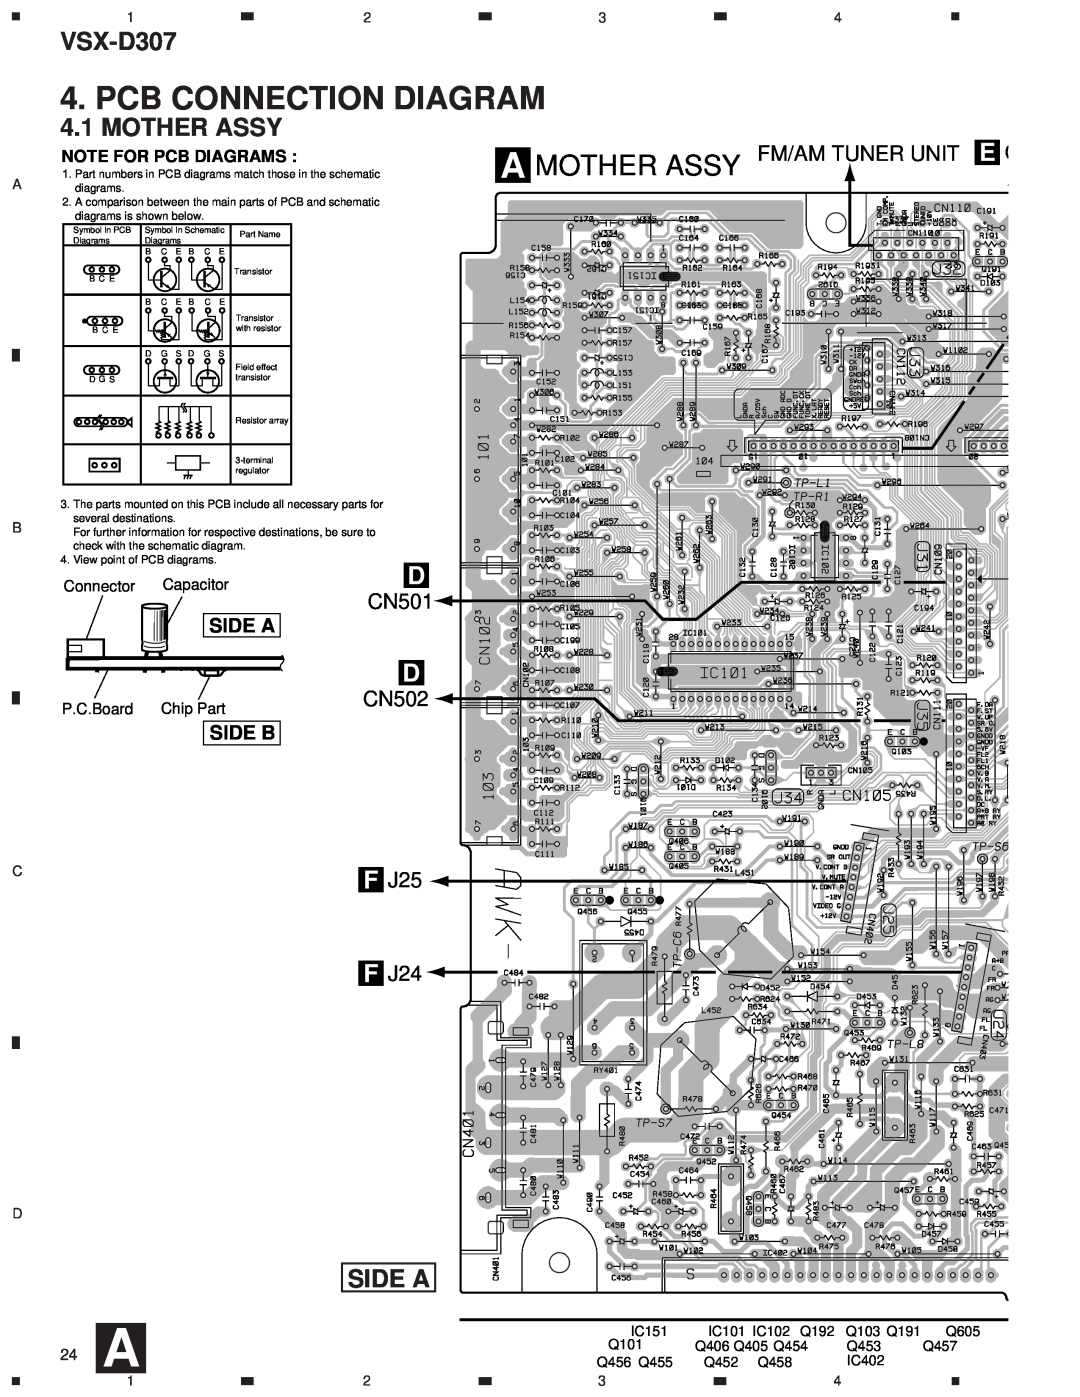 Dolby Laboratories STAV-3770 Pcb Connection Diagram, Side A, A Mother Assy Fm/Am Tuner Unit, CN501, CN502, F J25 